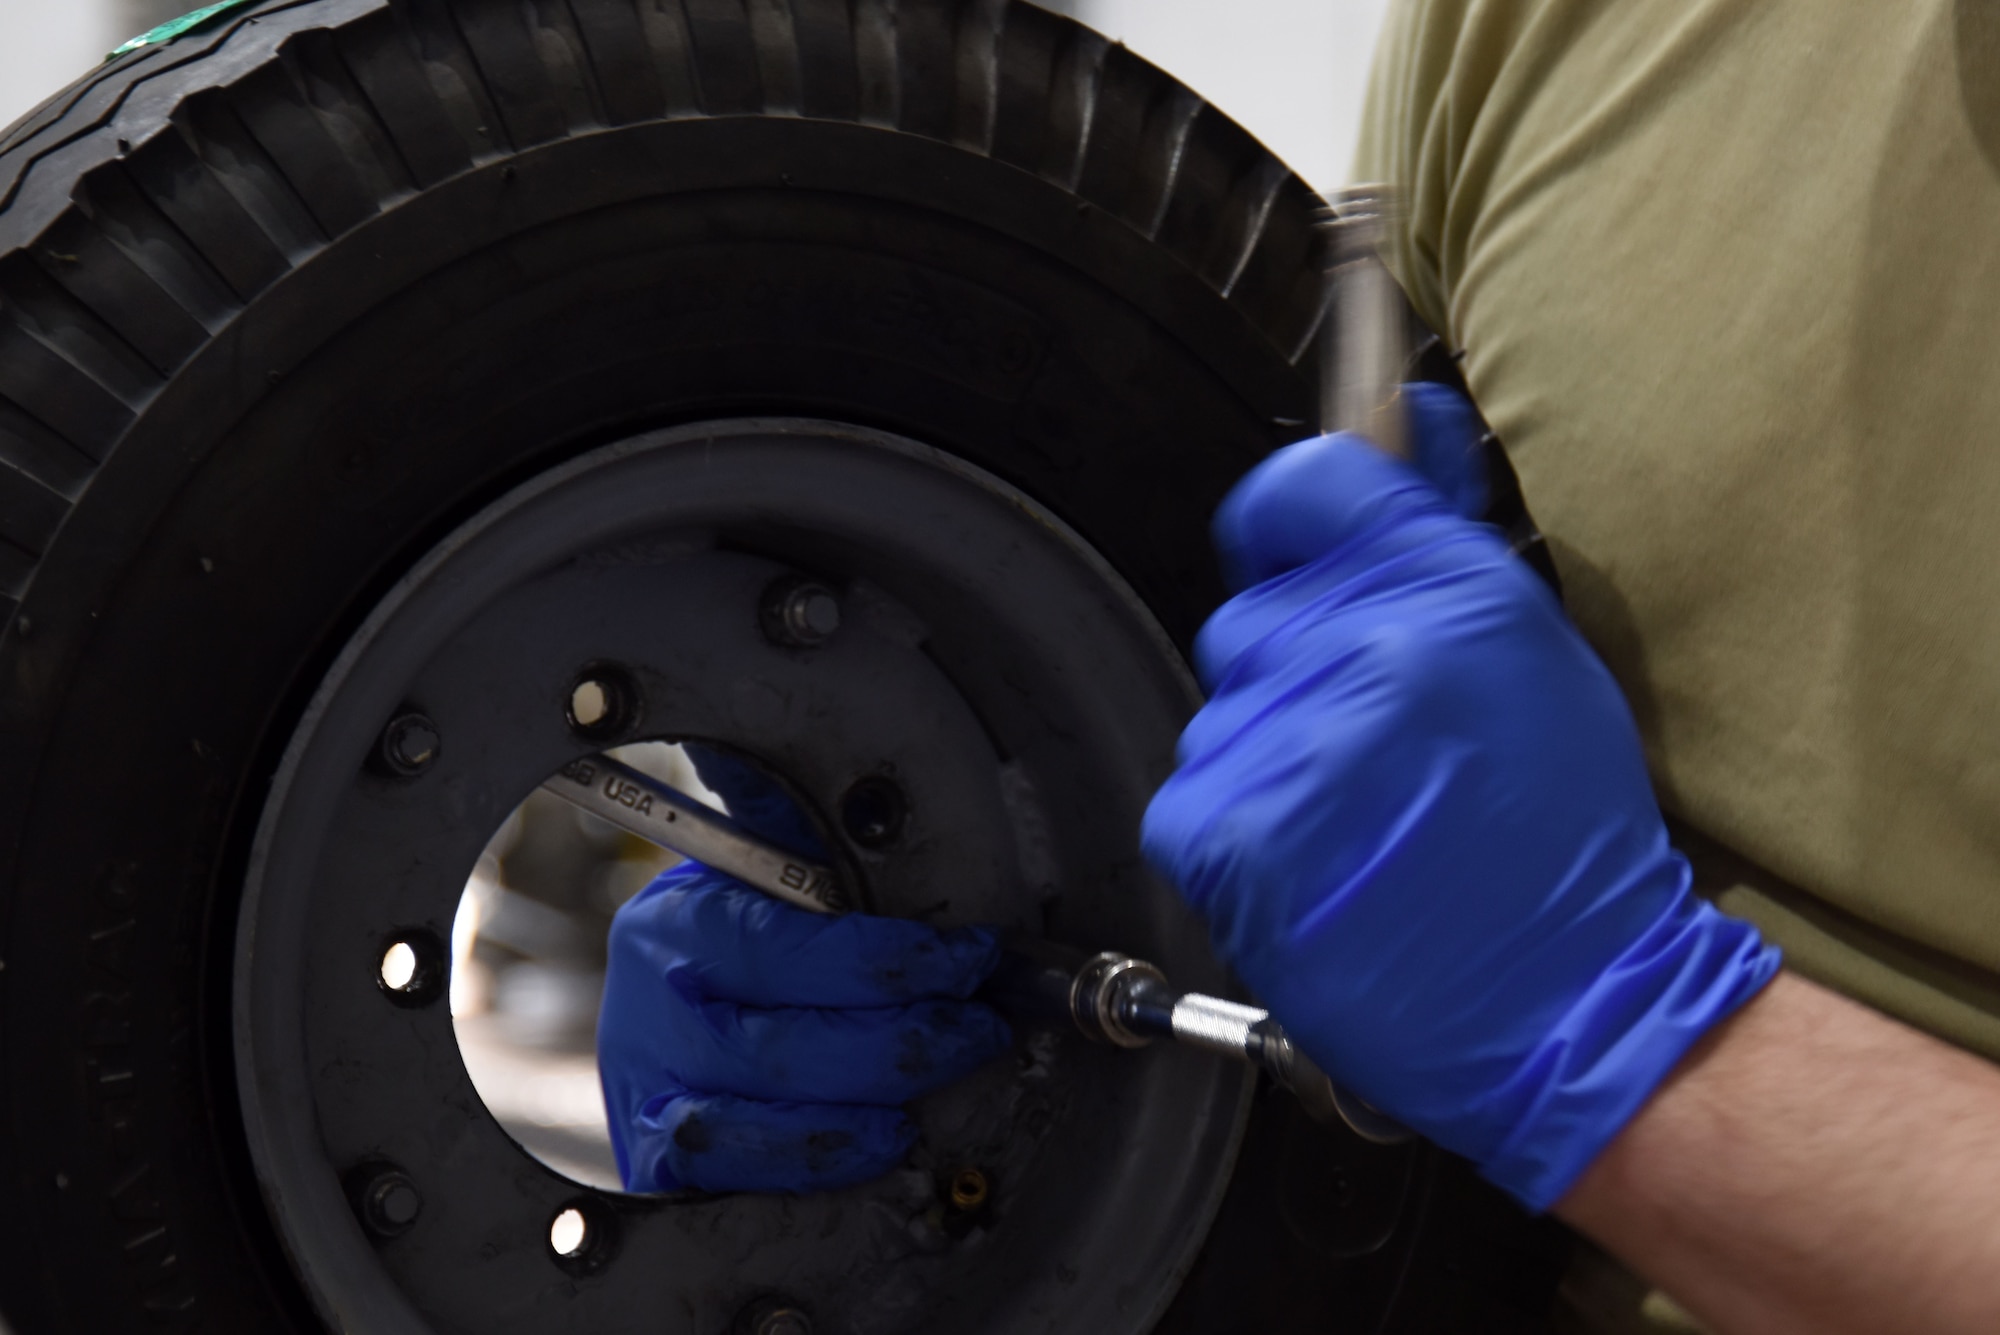 Senior Airman Nicholas Carcelli, 48th Equipment Maintenance Squadron aerospace ground equipment technician, replaces a bomb lift tire at Royal Air Force Lakenheath, England, Feb. 7. AGE technicians are responsible for fixing maintenance issues that arise on bomb lifts and other flightline equipment. (U.S. Air Force photo/Senior Airman Abby L. Finkel)